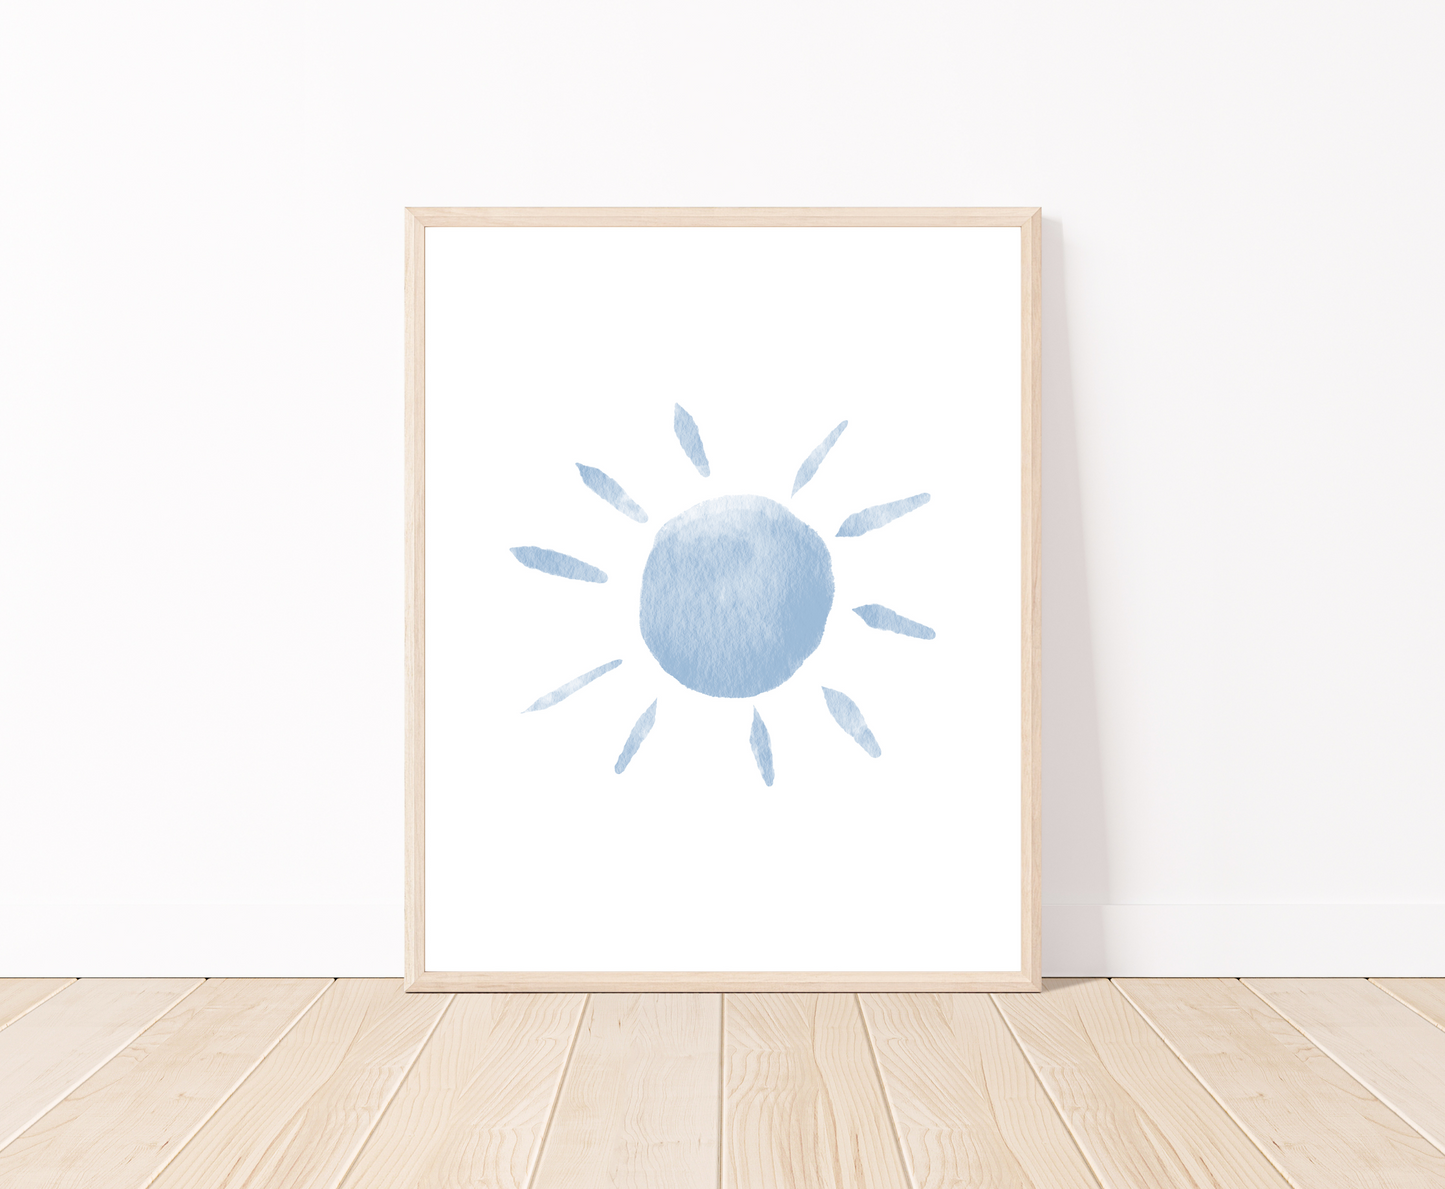 A digital poster is placed on a white wall and parquet flooring and shows a baby blue sun.